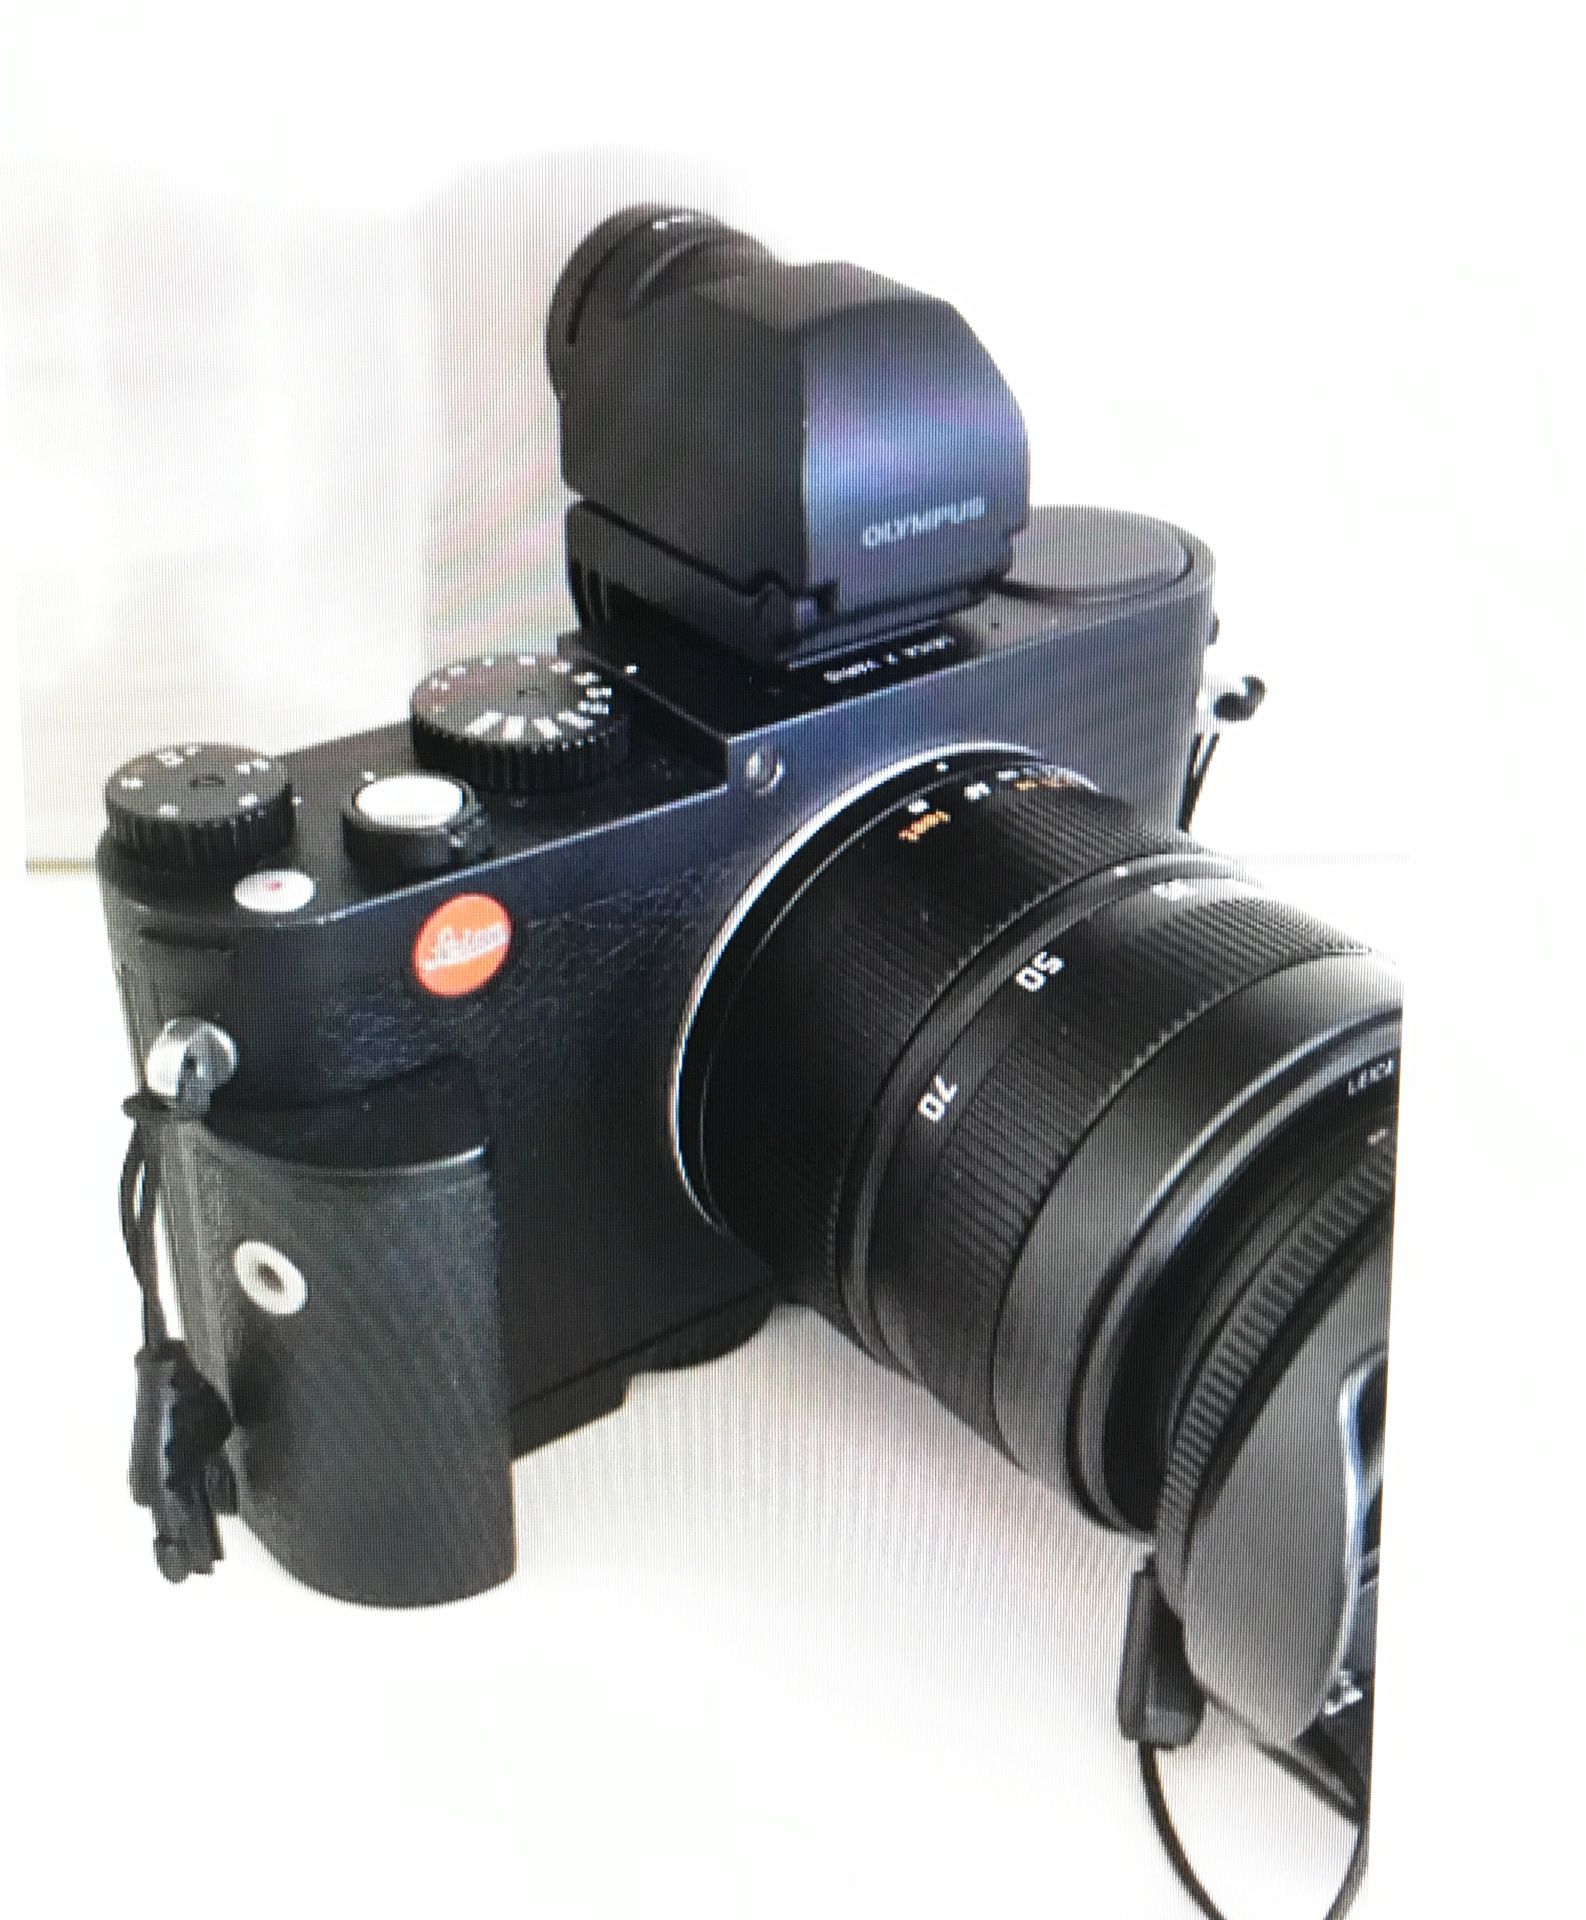 Leica X Vario electronic view finder vf-2 made by Olympus. Xlnd cond. $180 (view finder only)